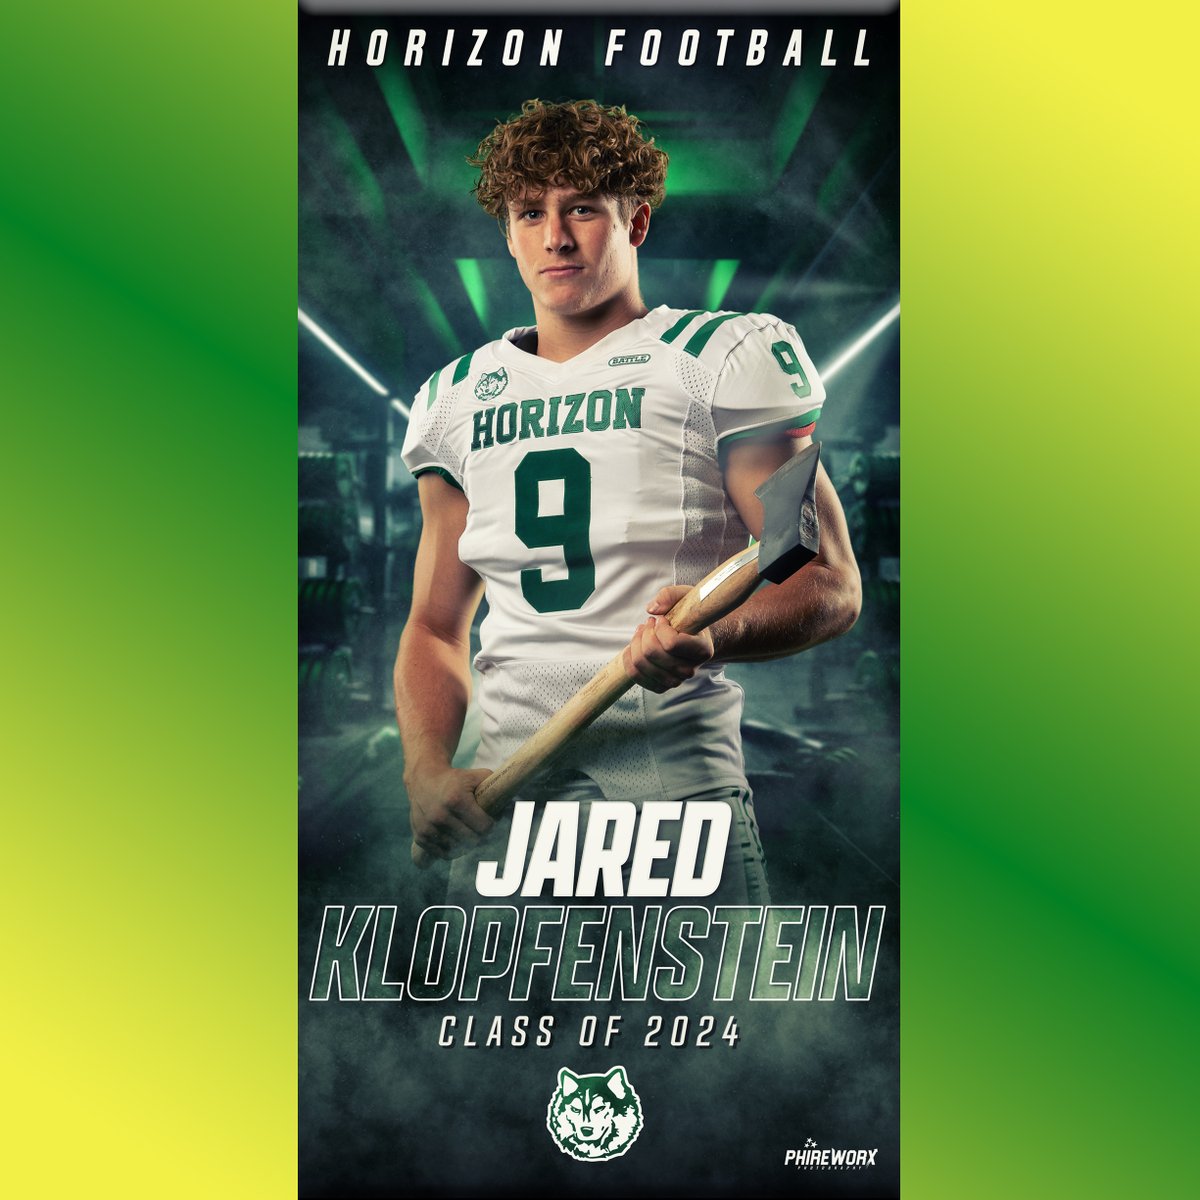 Last shoutout to our Sr. #9 Jared Klopfenstein. Best of luck to you with your future endeavors! #Huskyfamily @JaredKlopfenst1 @HorizonFootball @HHSathleticsAZ @PVUSDATHLETICS